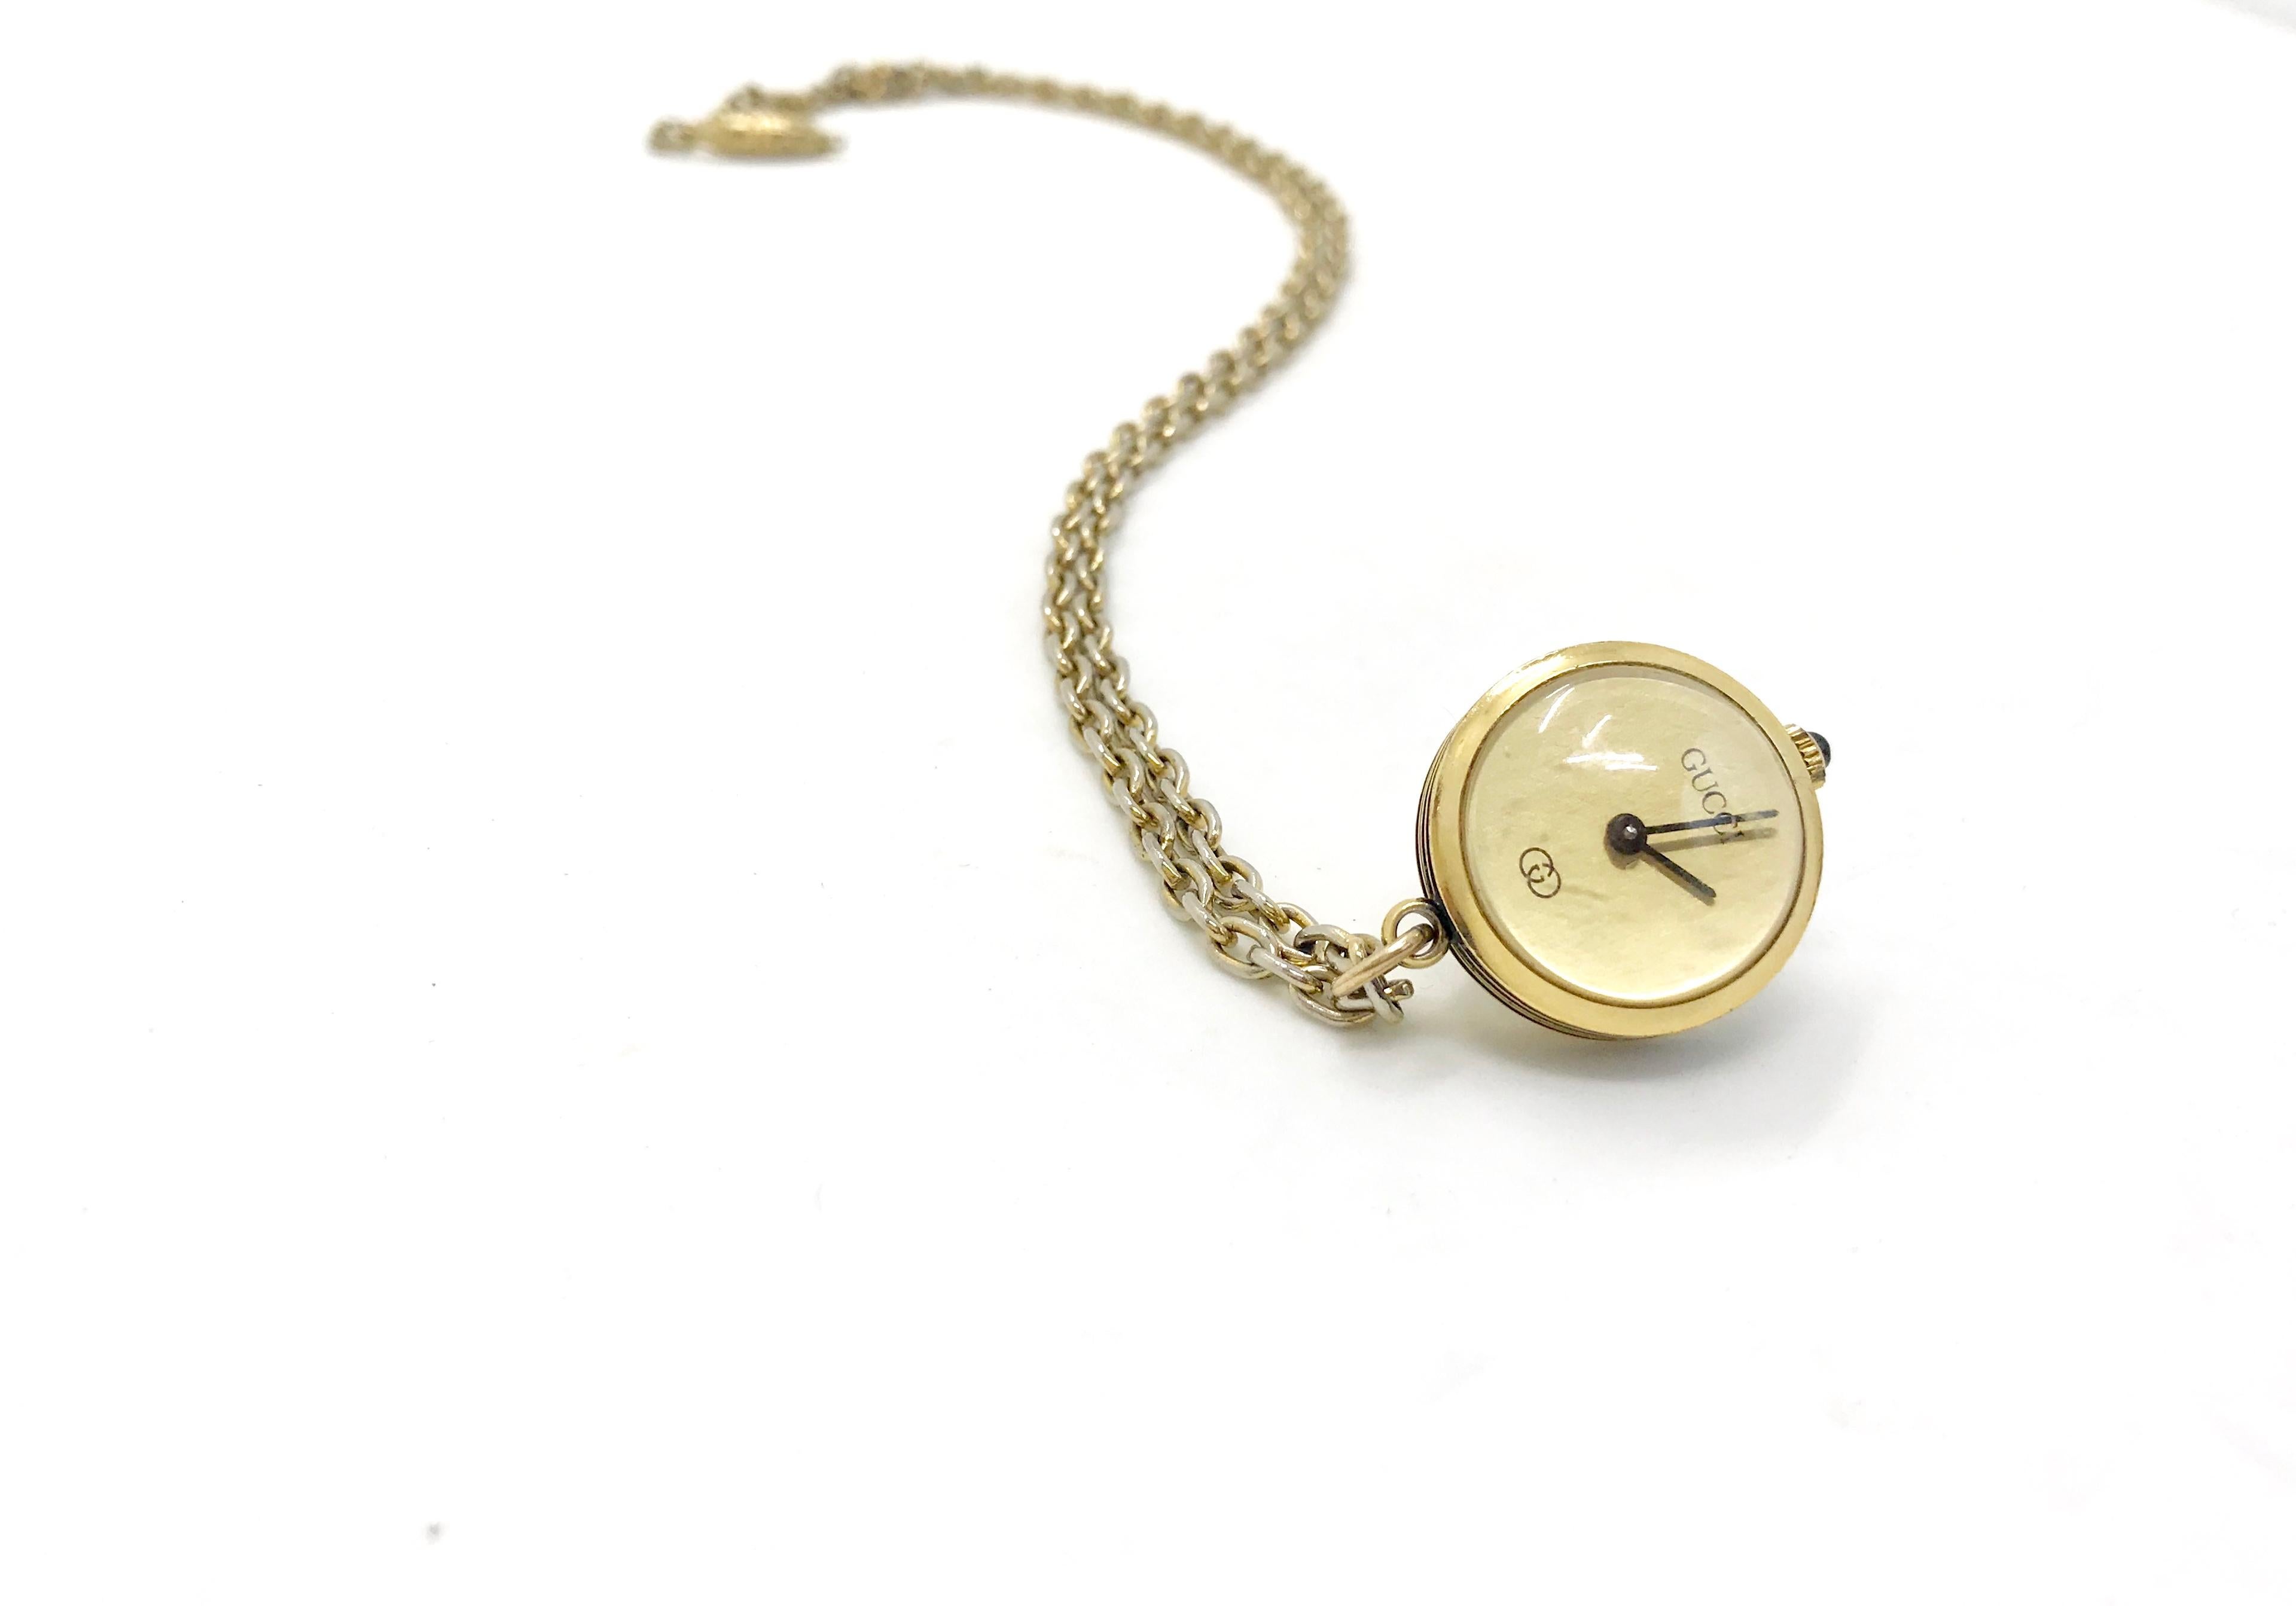 Vintage 1970s Gucci watch pendant necklace. 
 
Rare and iconic piece from the Gucci archives.

Measuring around 3/4